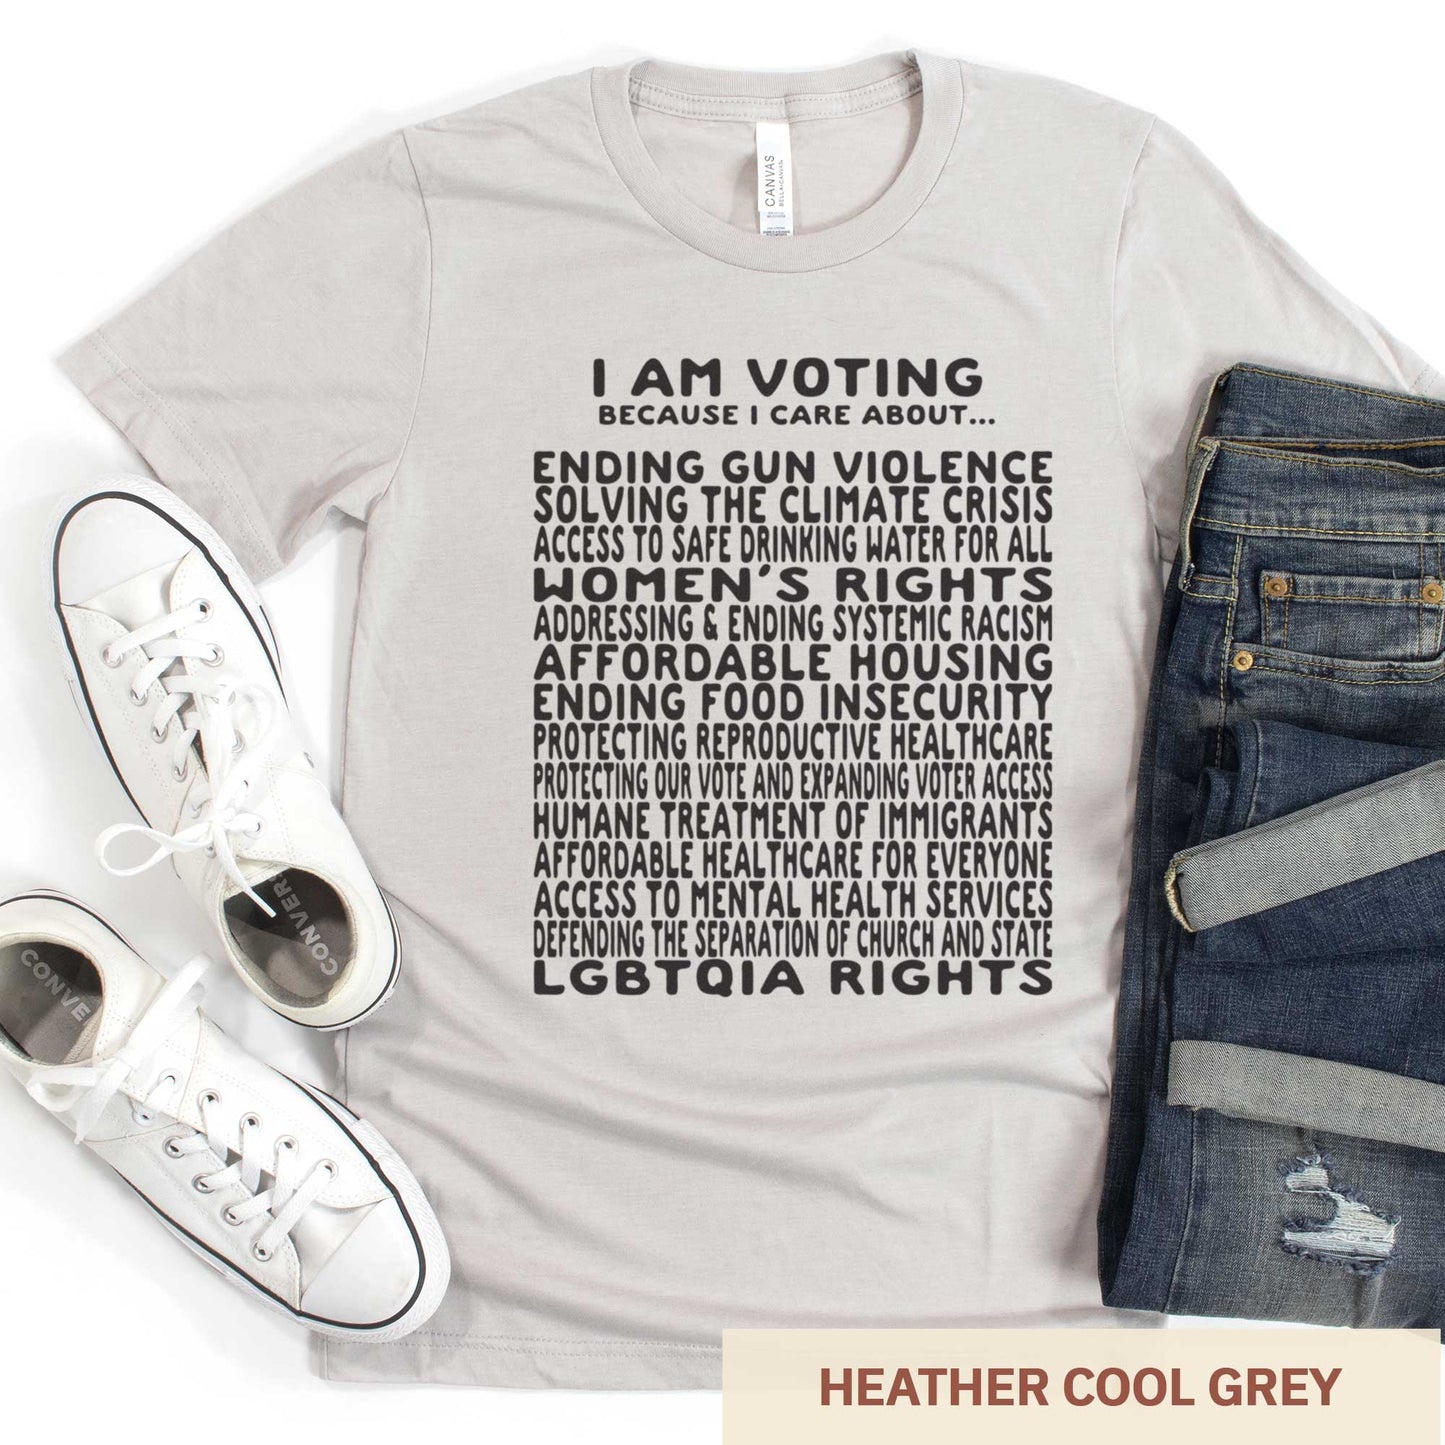 A heather cool grey Bella Canvas t-shirt featuring a long list of issues to vote on.